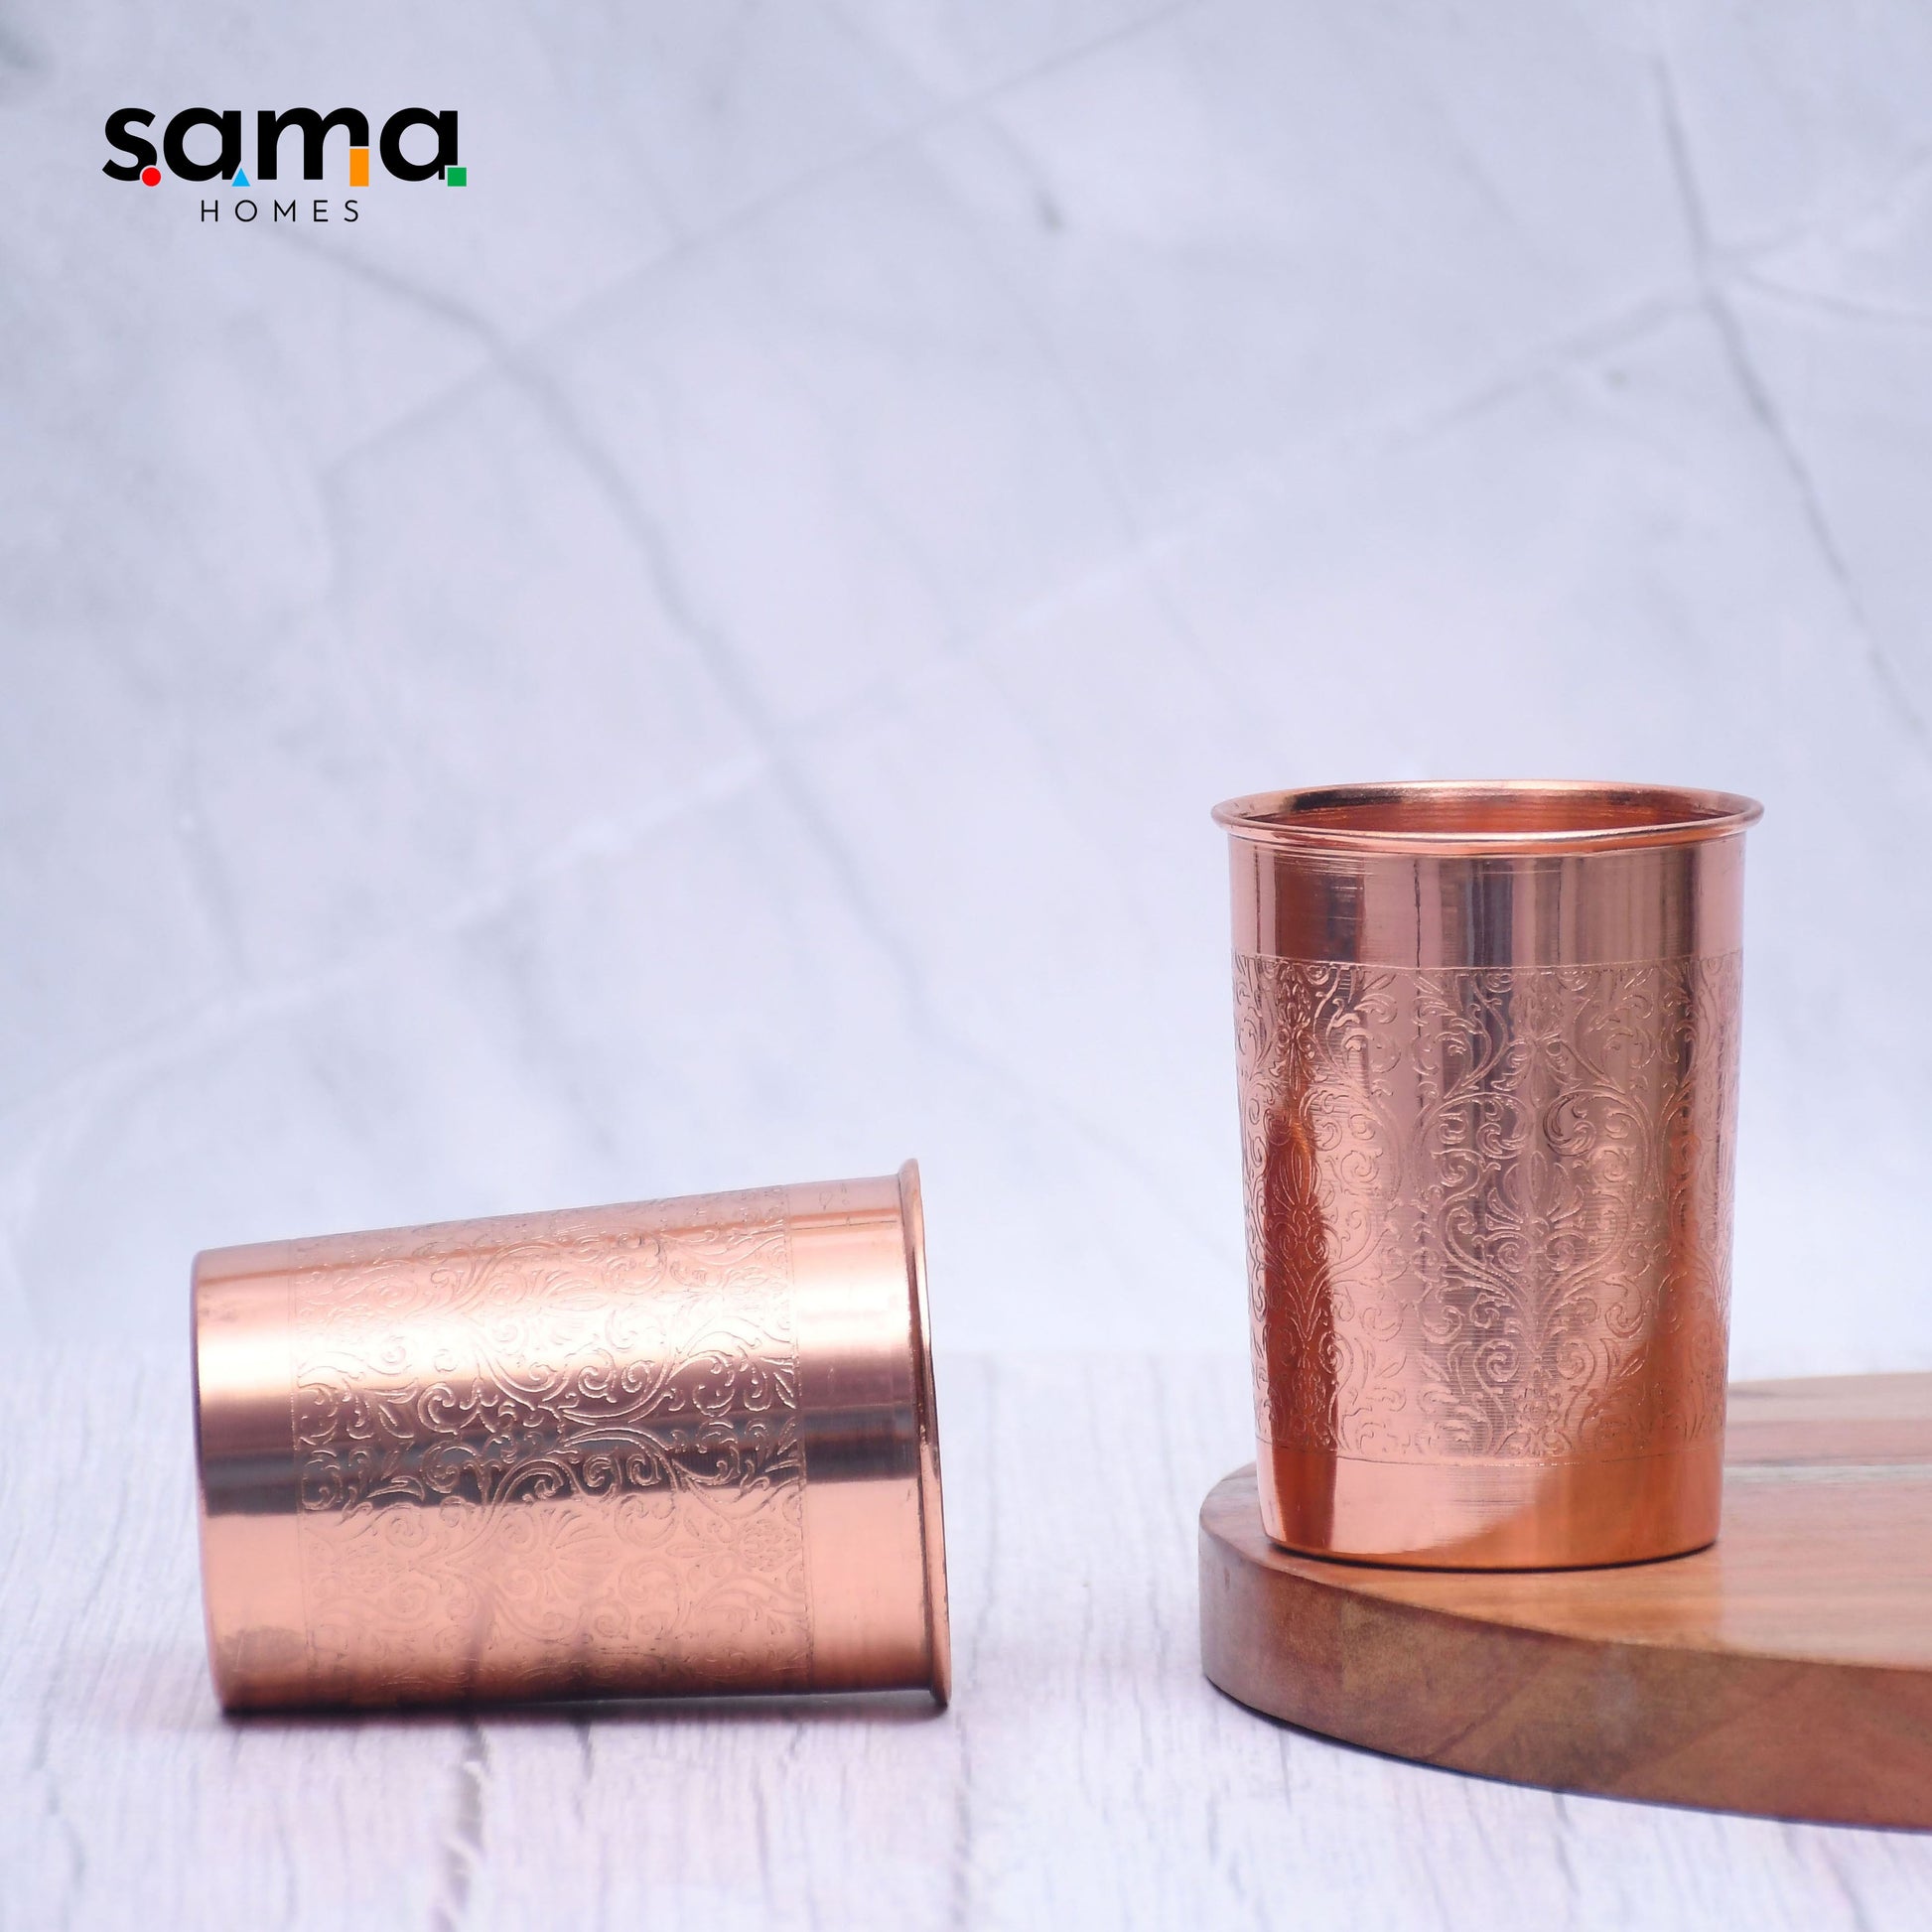 SAMA Homes - pure copper water glass set of 2 engrave designed tumbler capacity 300ml